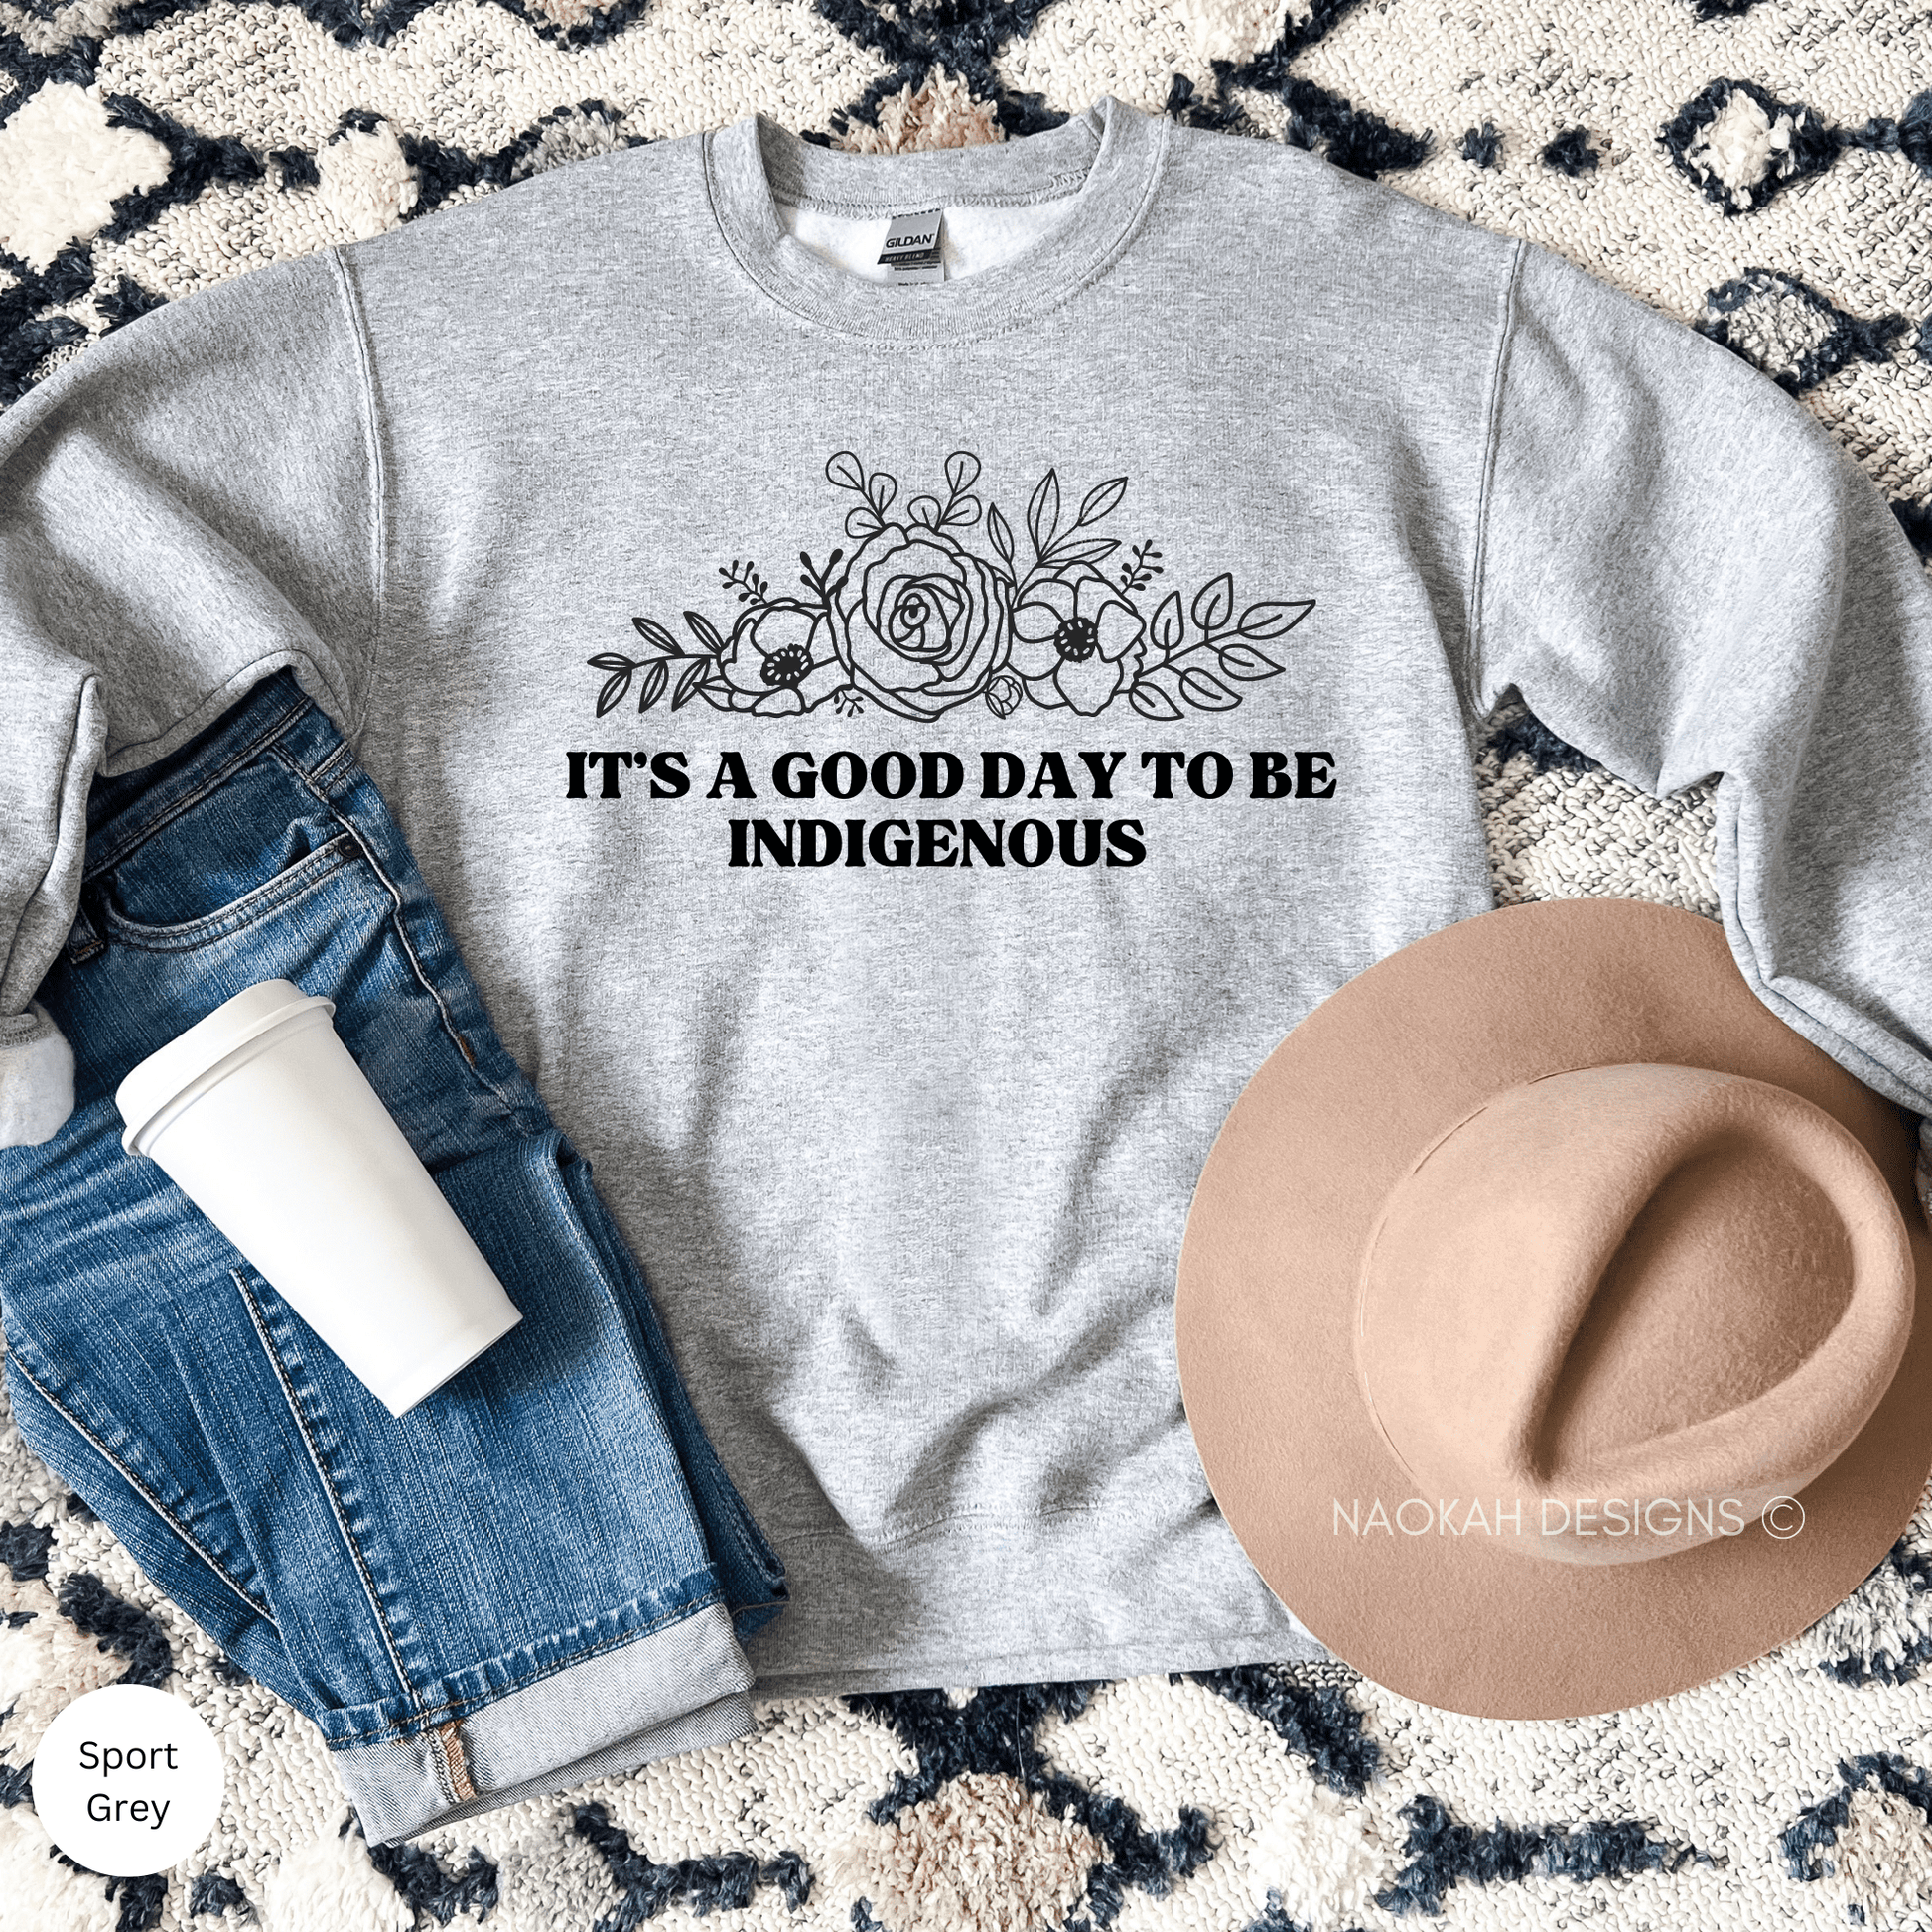 It's a good day to be Indigenous shirt, Indigenous Unisex Sweater, Indigenous Educated, Proudly Indigenous, Indigenous Graduation